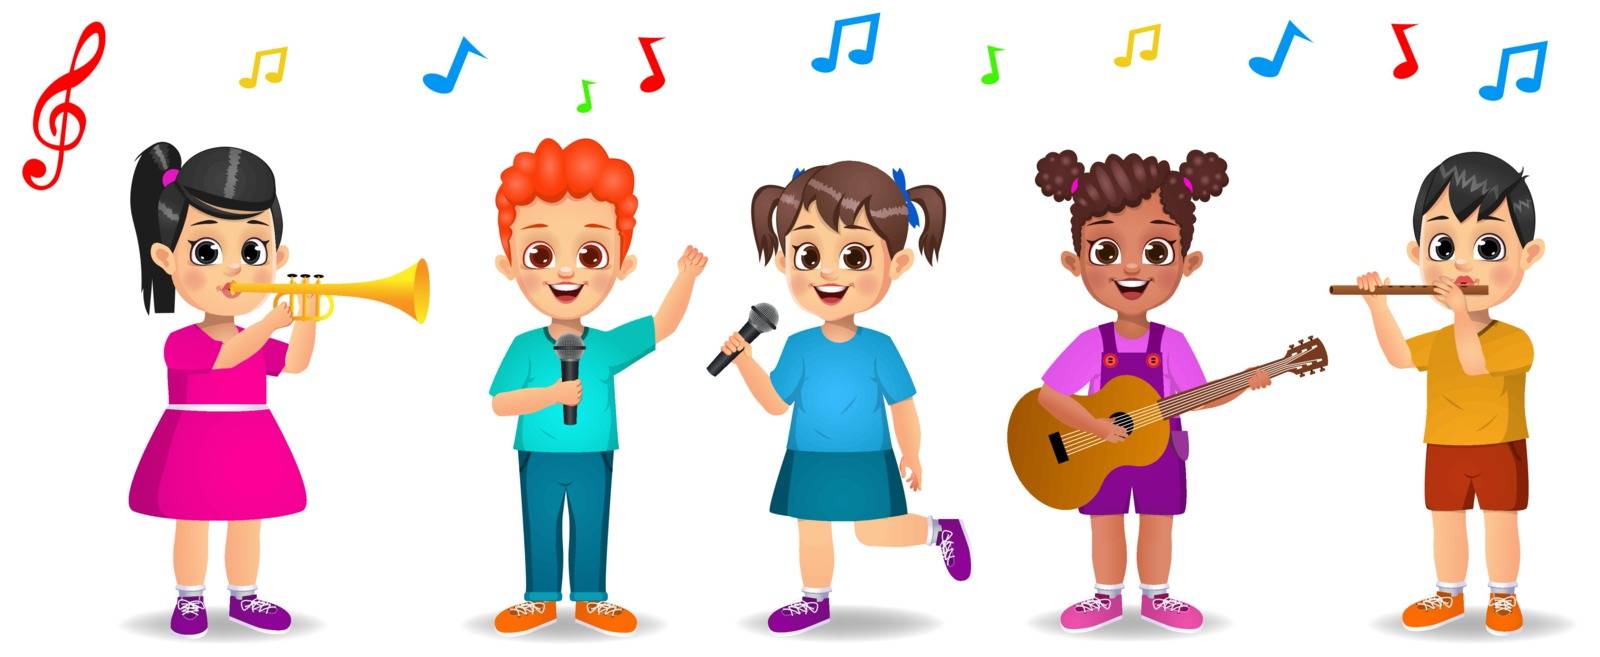 cute kids playing music together vector